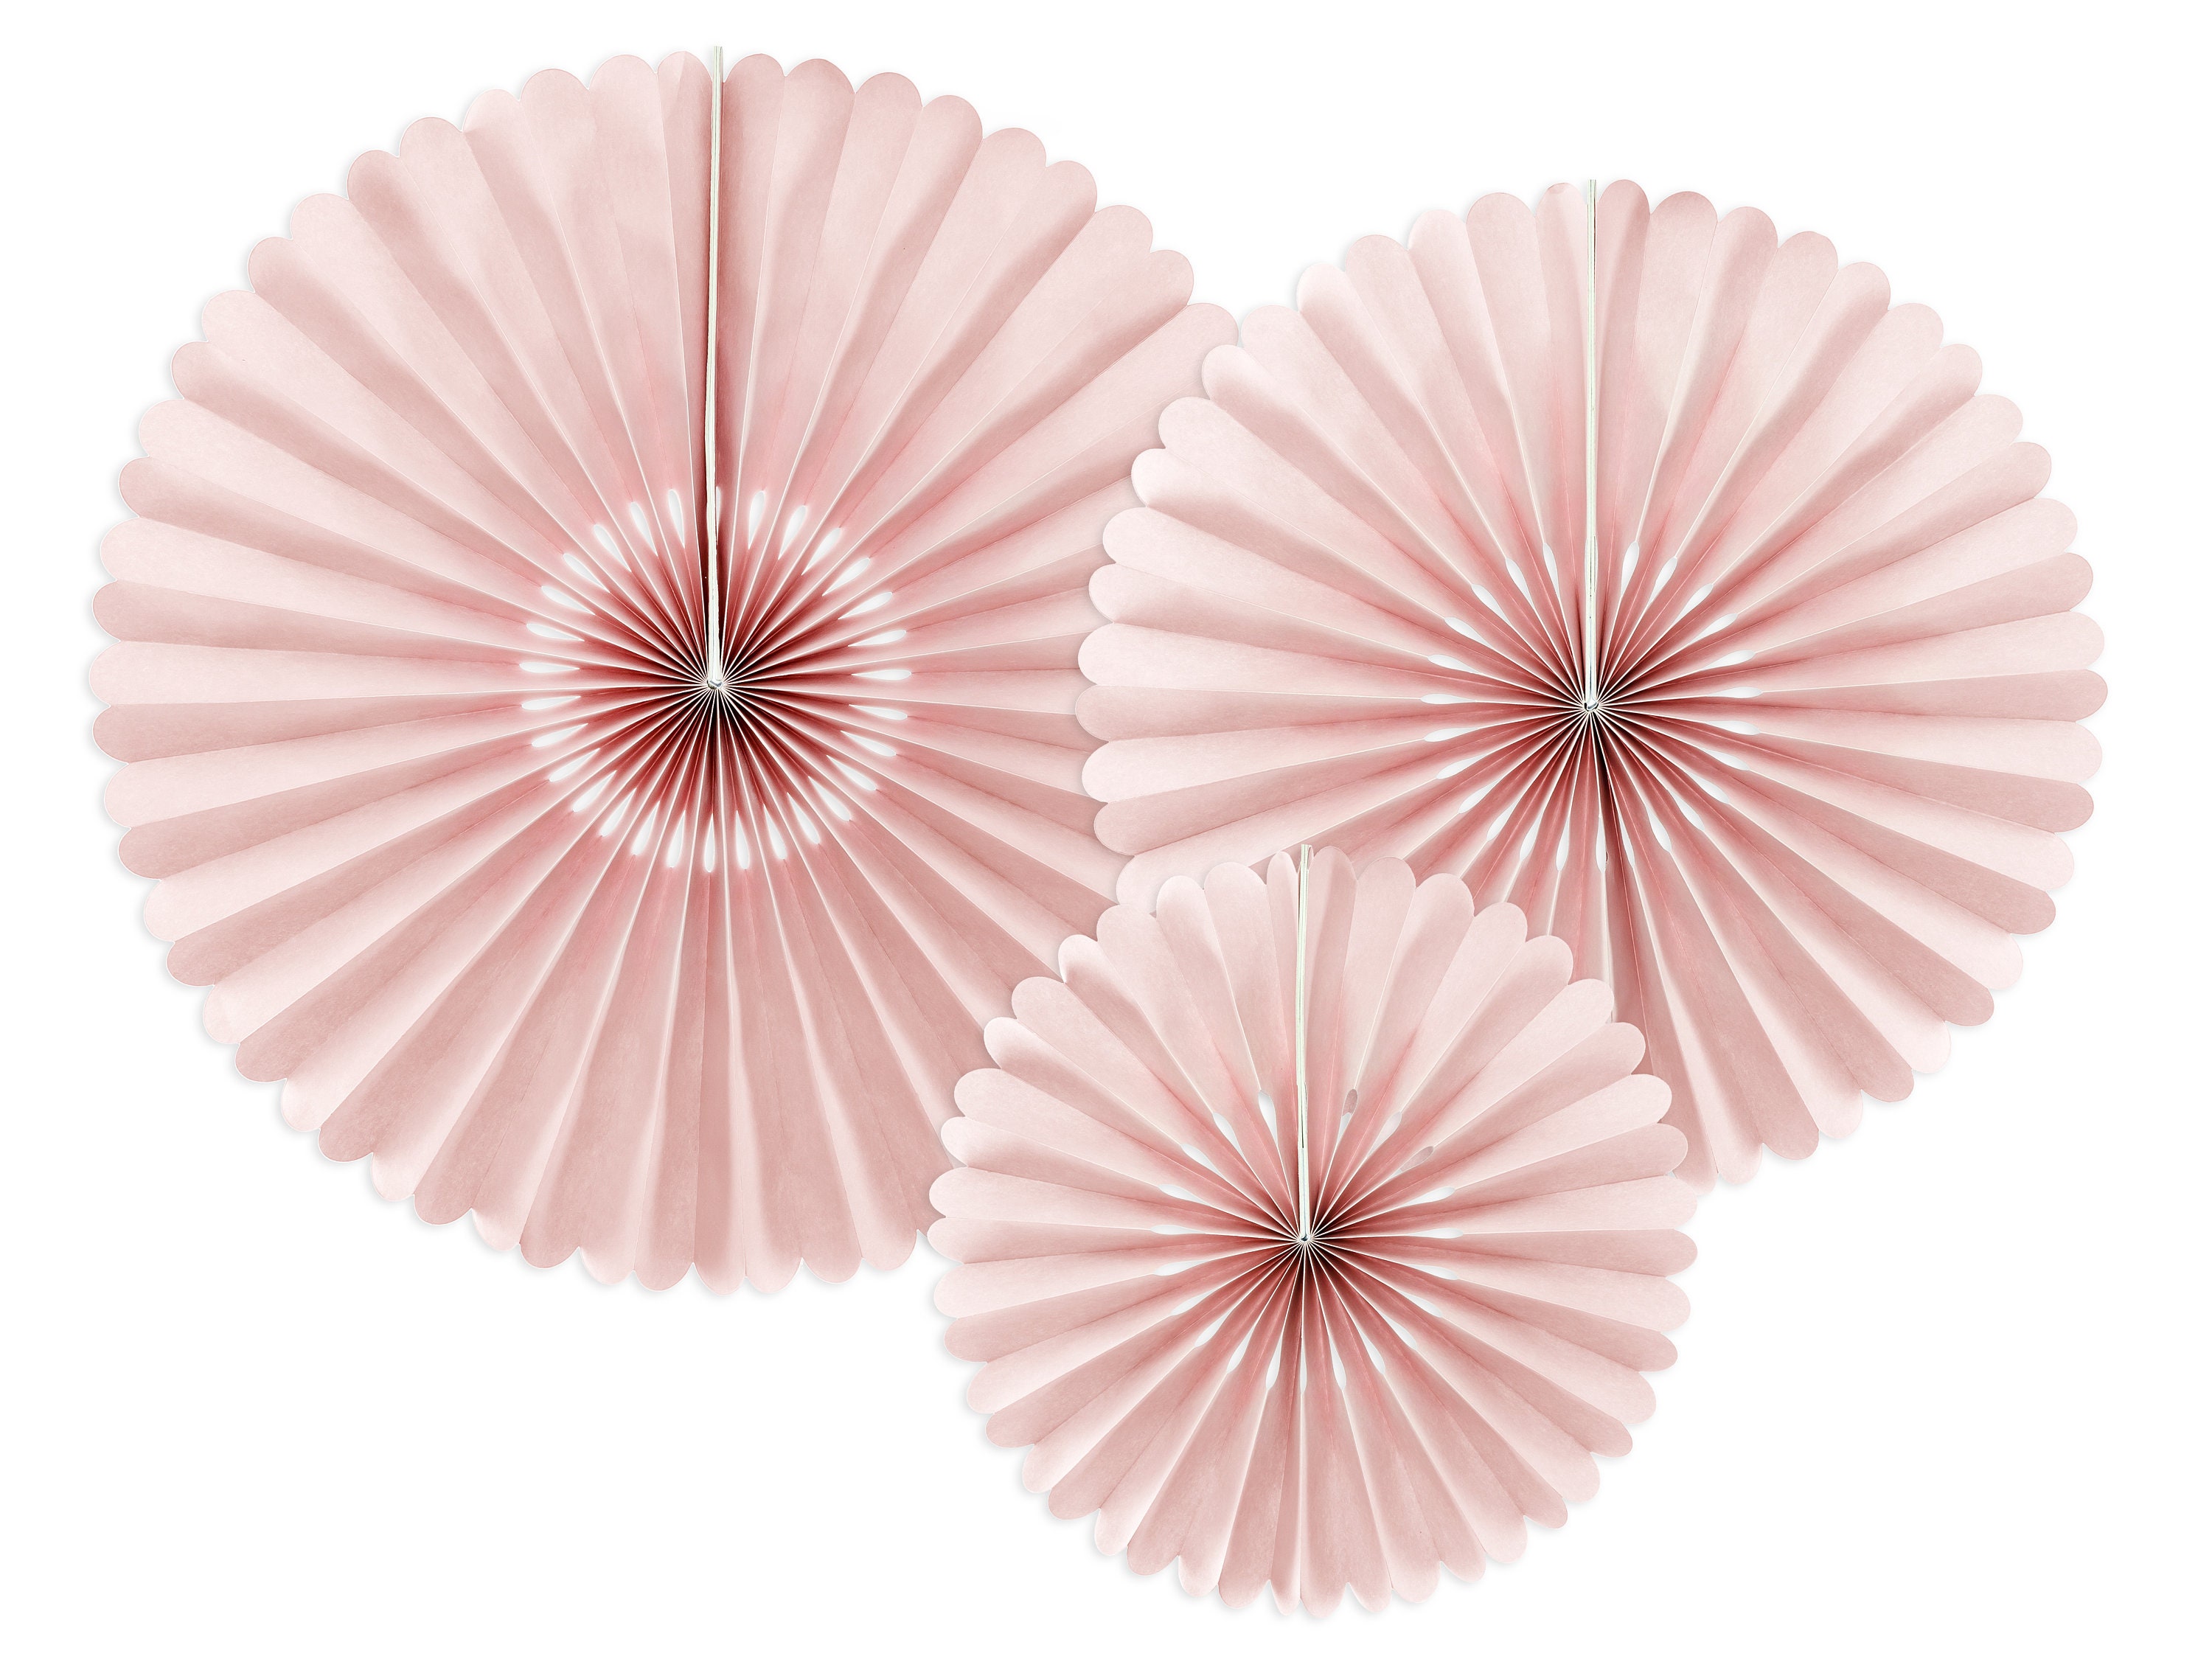 BlushBalloonParty Rose Gold and Blush Party Fans - Rose Gold Paper Fans - Paper Rosettes - Paper Fan Backdrop - Photo Shoot - Blush Party Fans - Pack of 8